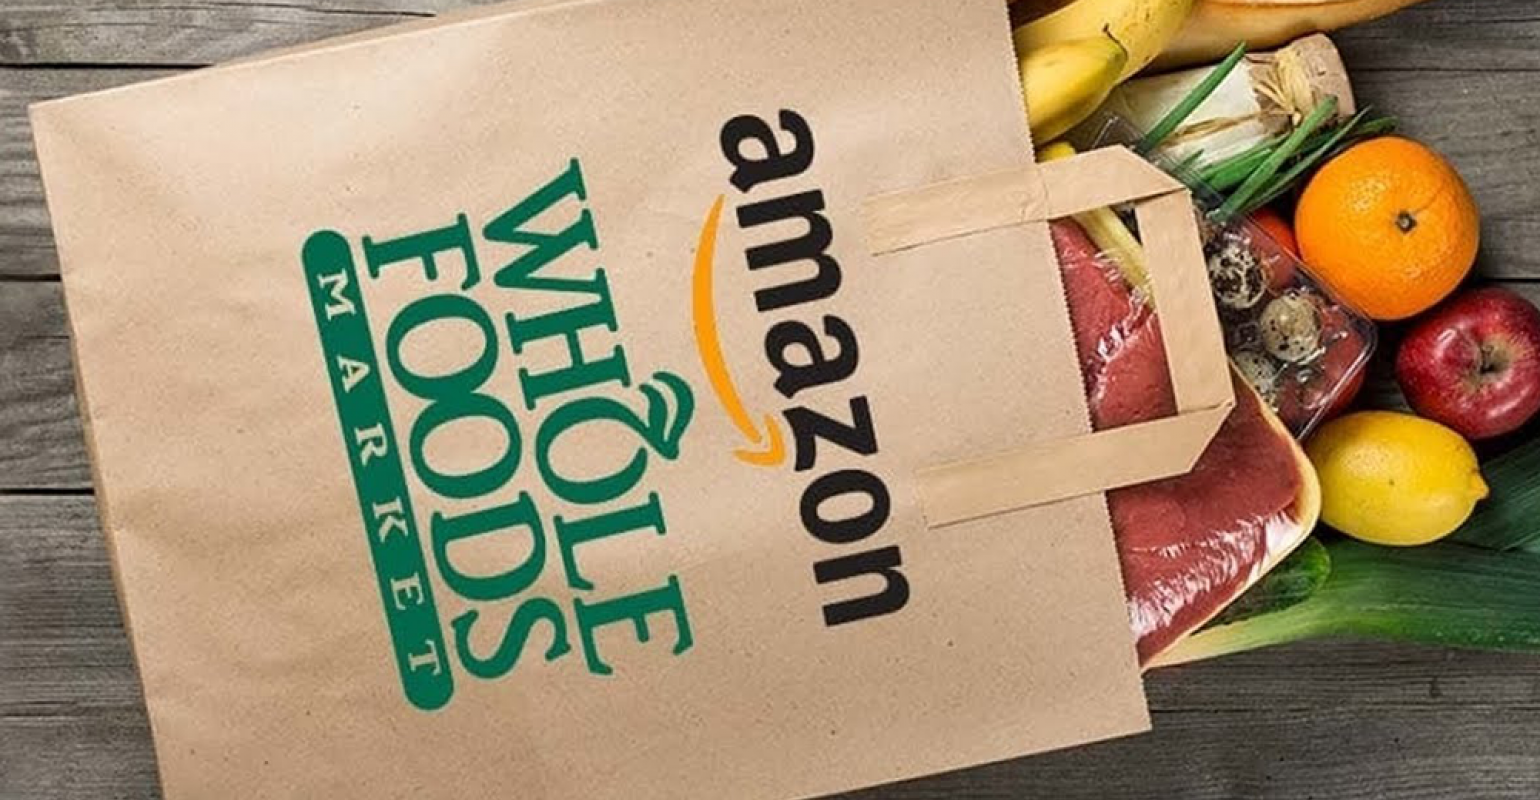 https://www.supermarketnews.com/sites/supermarketnews.com/files/styles/article_featured_retina/public/Amazon_Whole_Foods_Prime_Now_grocery_bag_1.png?itok=bBsLE3JC